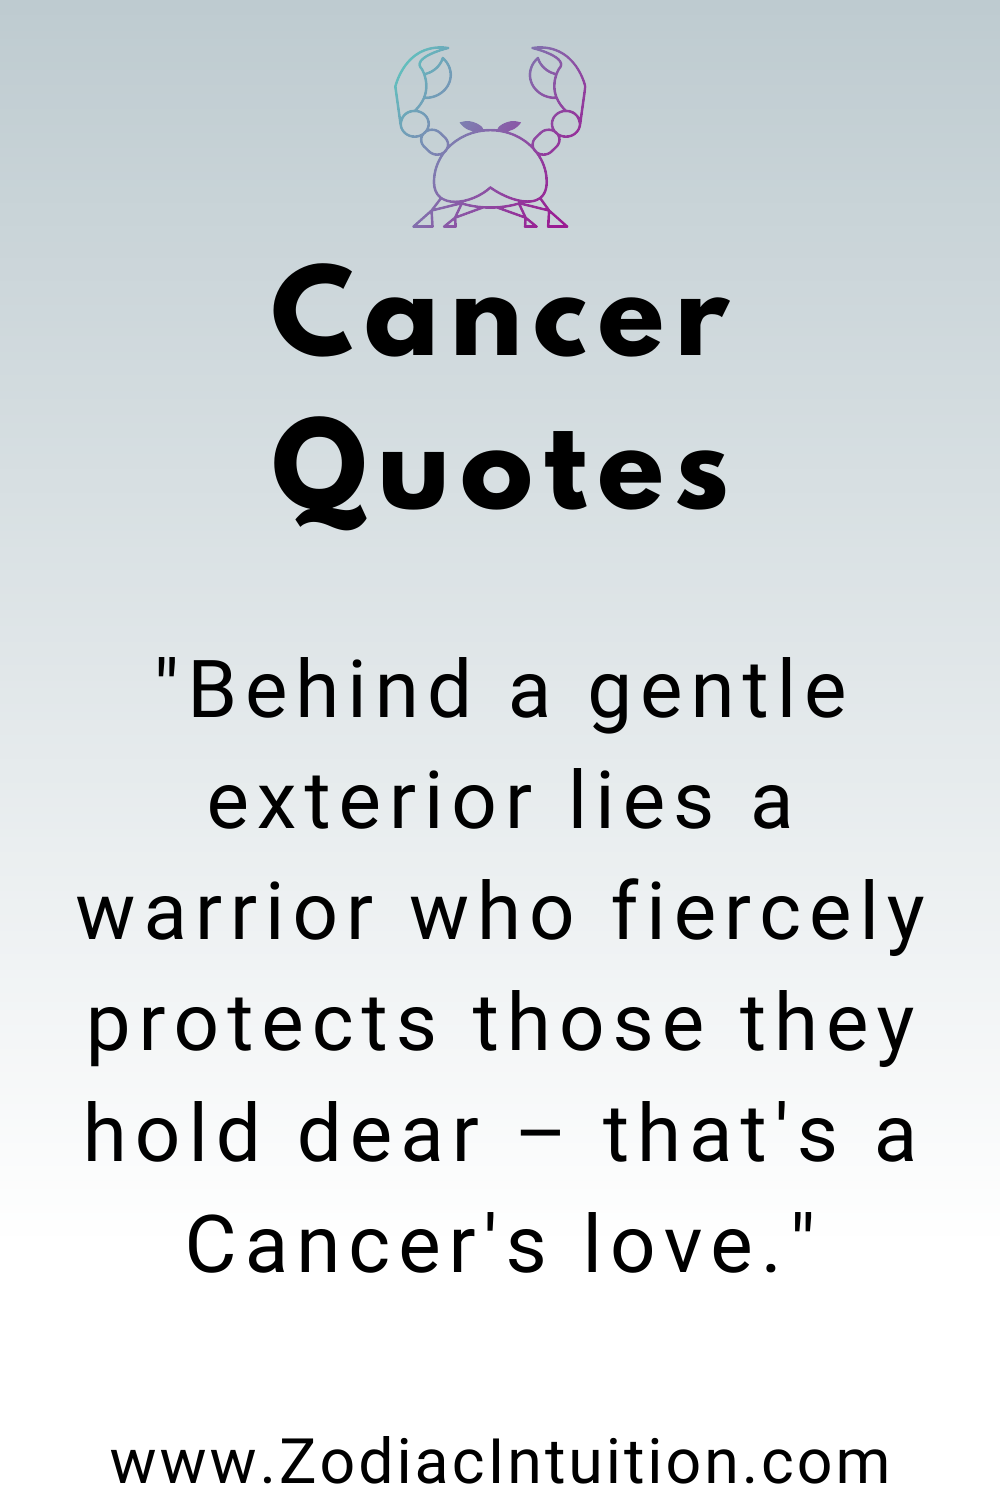 Top 5 Cancer Quotes And Inspiration